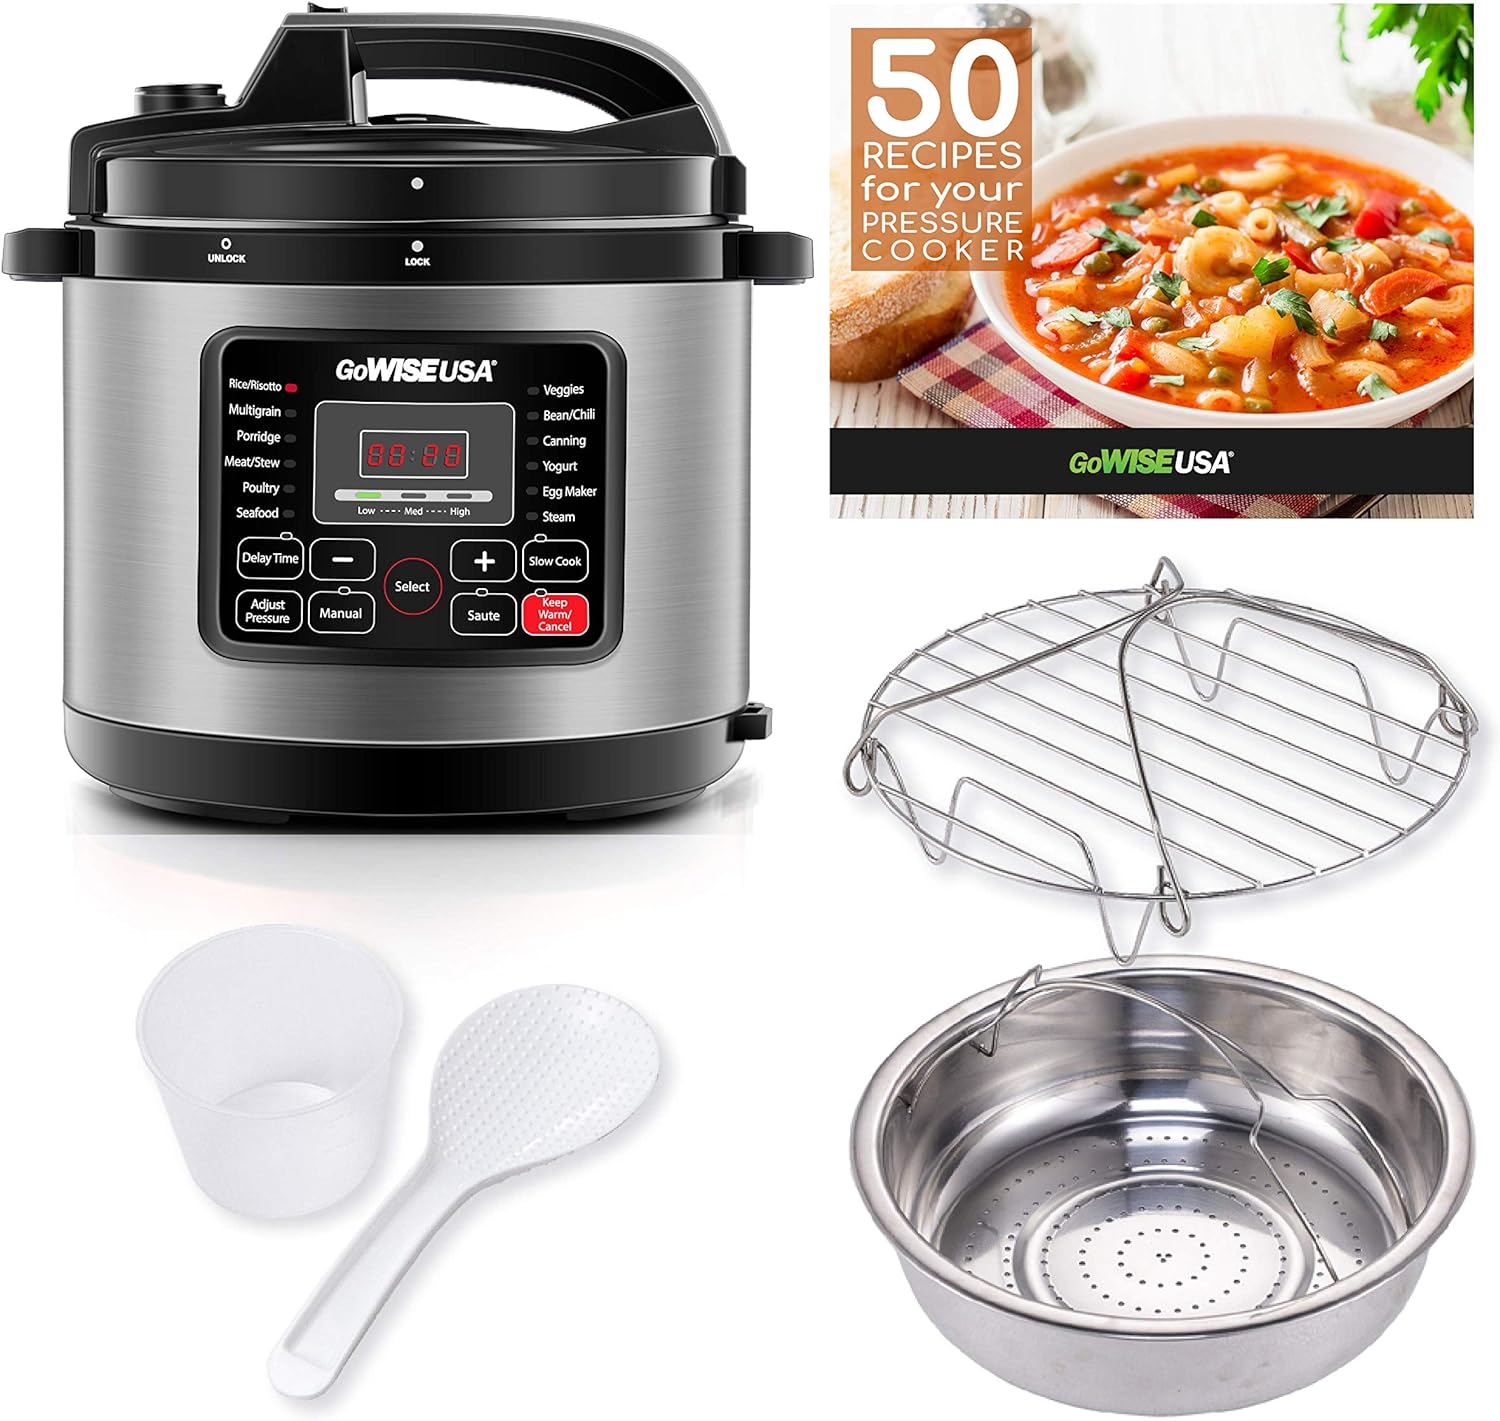 What Is The Wattage On The GoWISE USA 14 QT Electric Pressure Cooker?